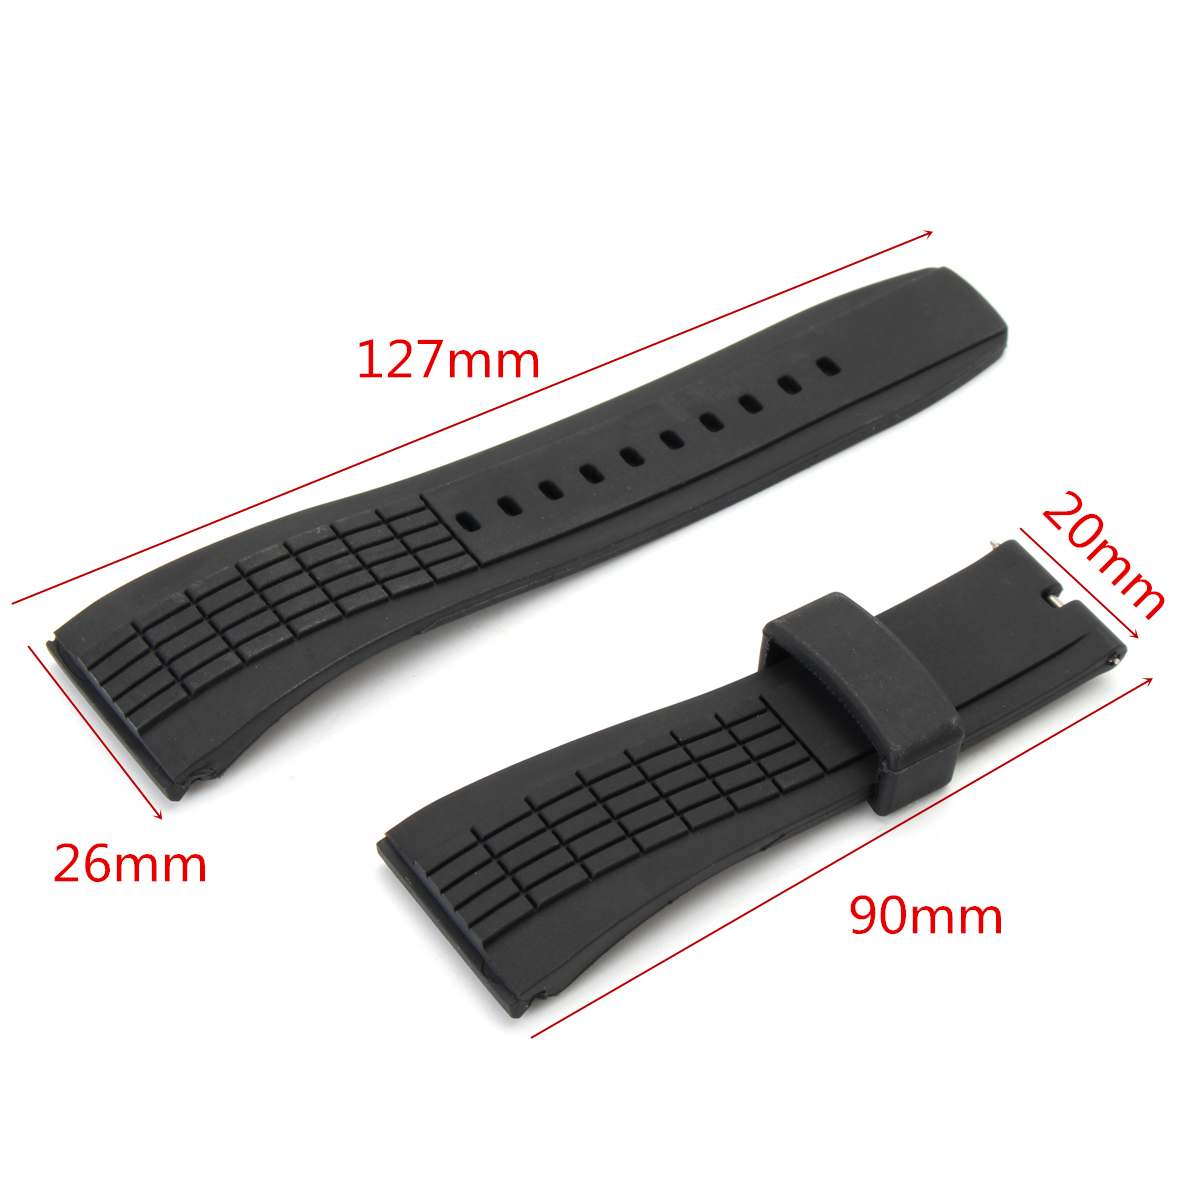 20-26mm-Silicone-Black-Watch-Band-Strap-For-Seiko-Velatura-Watch-Replaceable-1246315